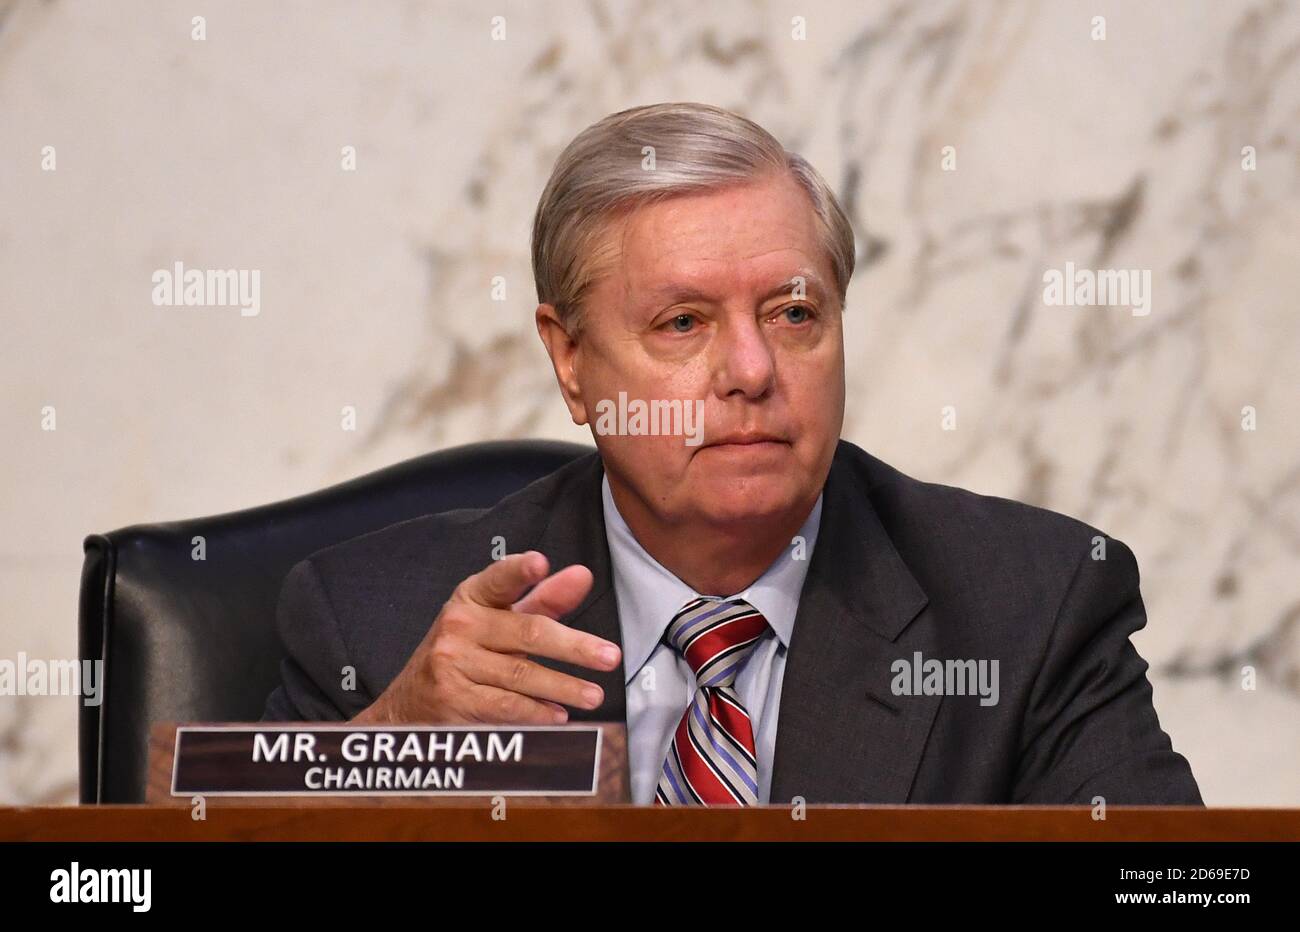 United States Senator Lindsey Graham (Republican of South Carolina), Chairman, US Senate Judiciary Committee, speaks during a Senate Judiciary Committee confirmation hearing on the nomination of Amy Coney Barrett for Associate Justice of the Supreme Court, on Capitol Hill in Washington, DC on Thursday, October 15, 2020. If confirmed, Barrett will replace Justice Ruth Bader Ginsburg, who died last month. Credit: Kevin Dietsch/Pool via CNP /MdeiaPunch Stock Photo